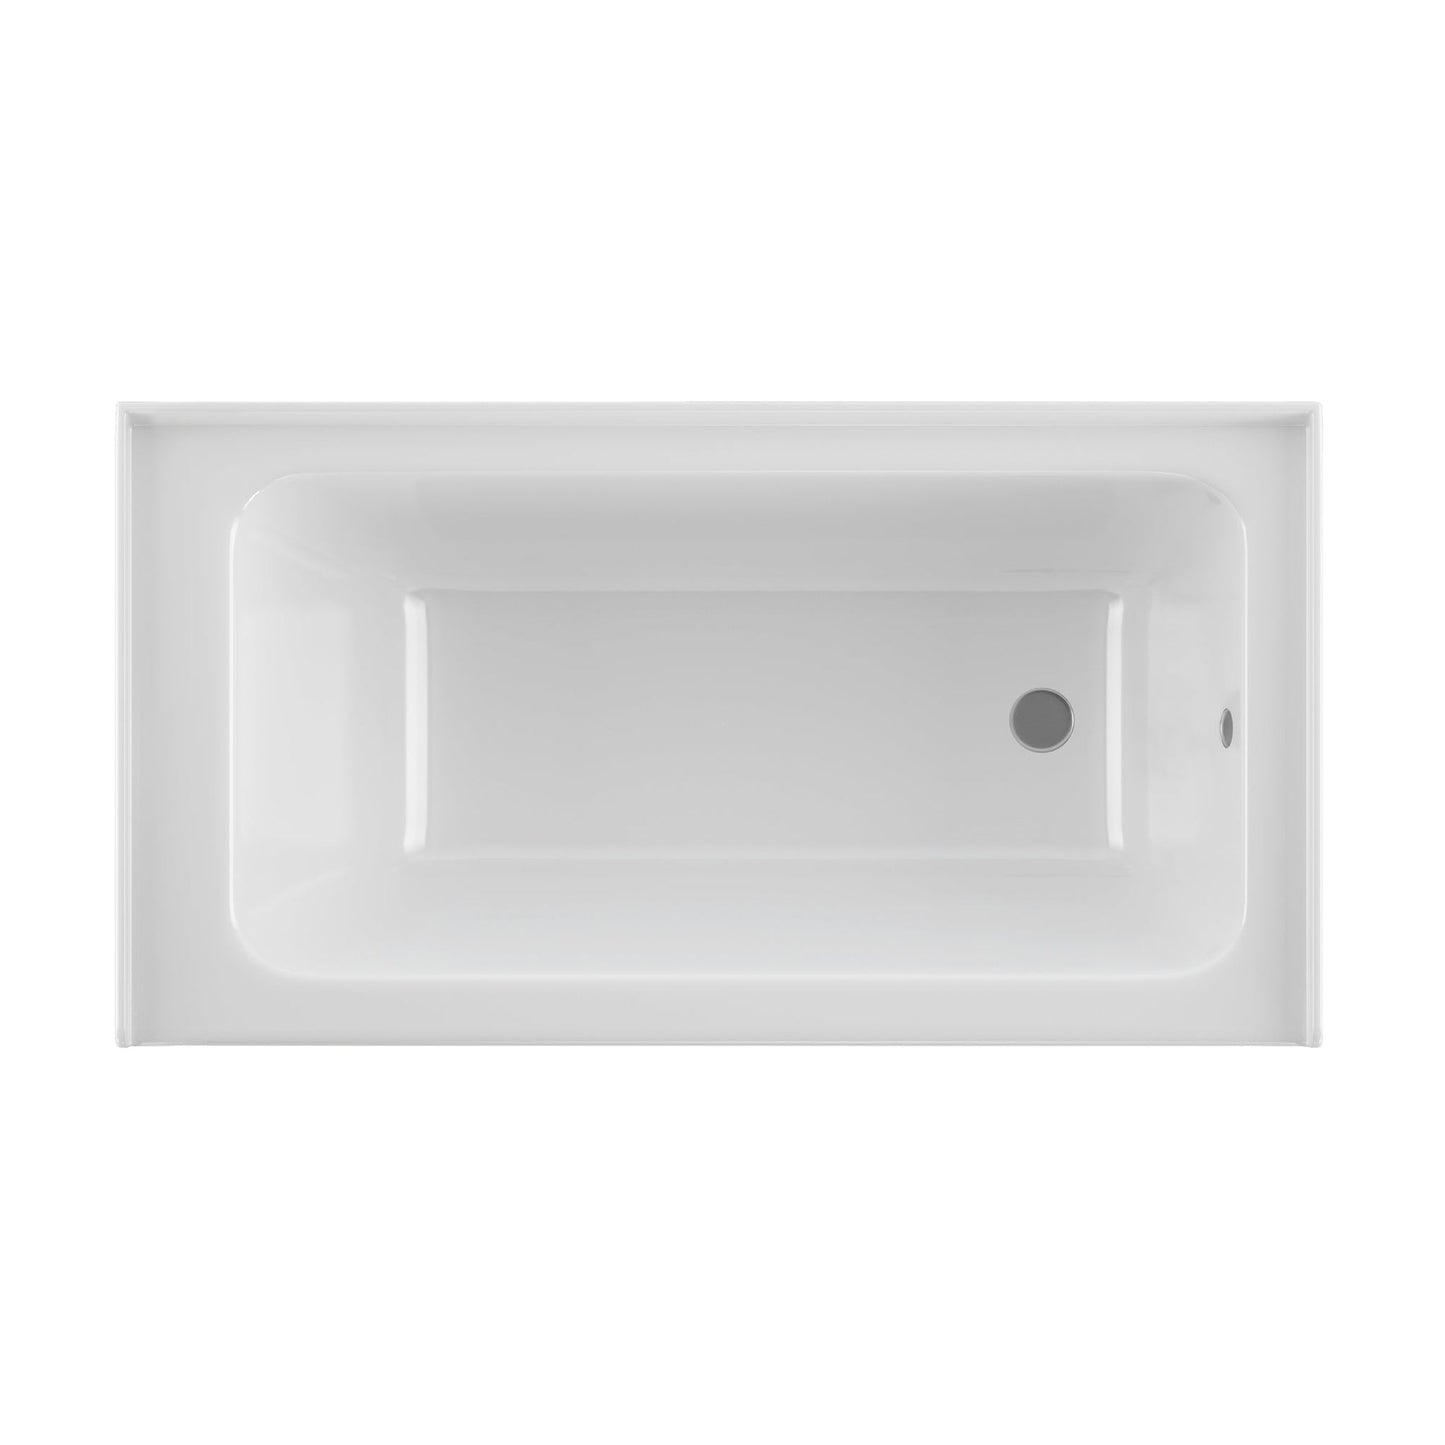 PULSE ShowerSpas 60" W x 30" D Rectangular Glossy White Acrylic Finish Right Drain Placement Alcove Tub